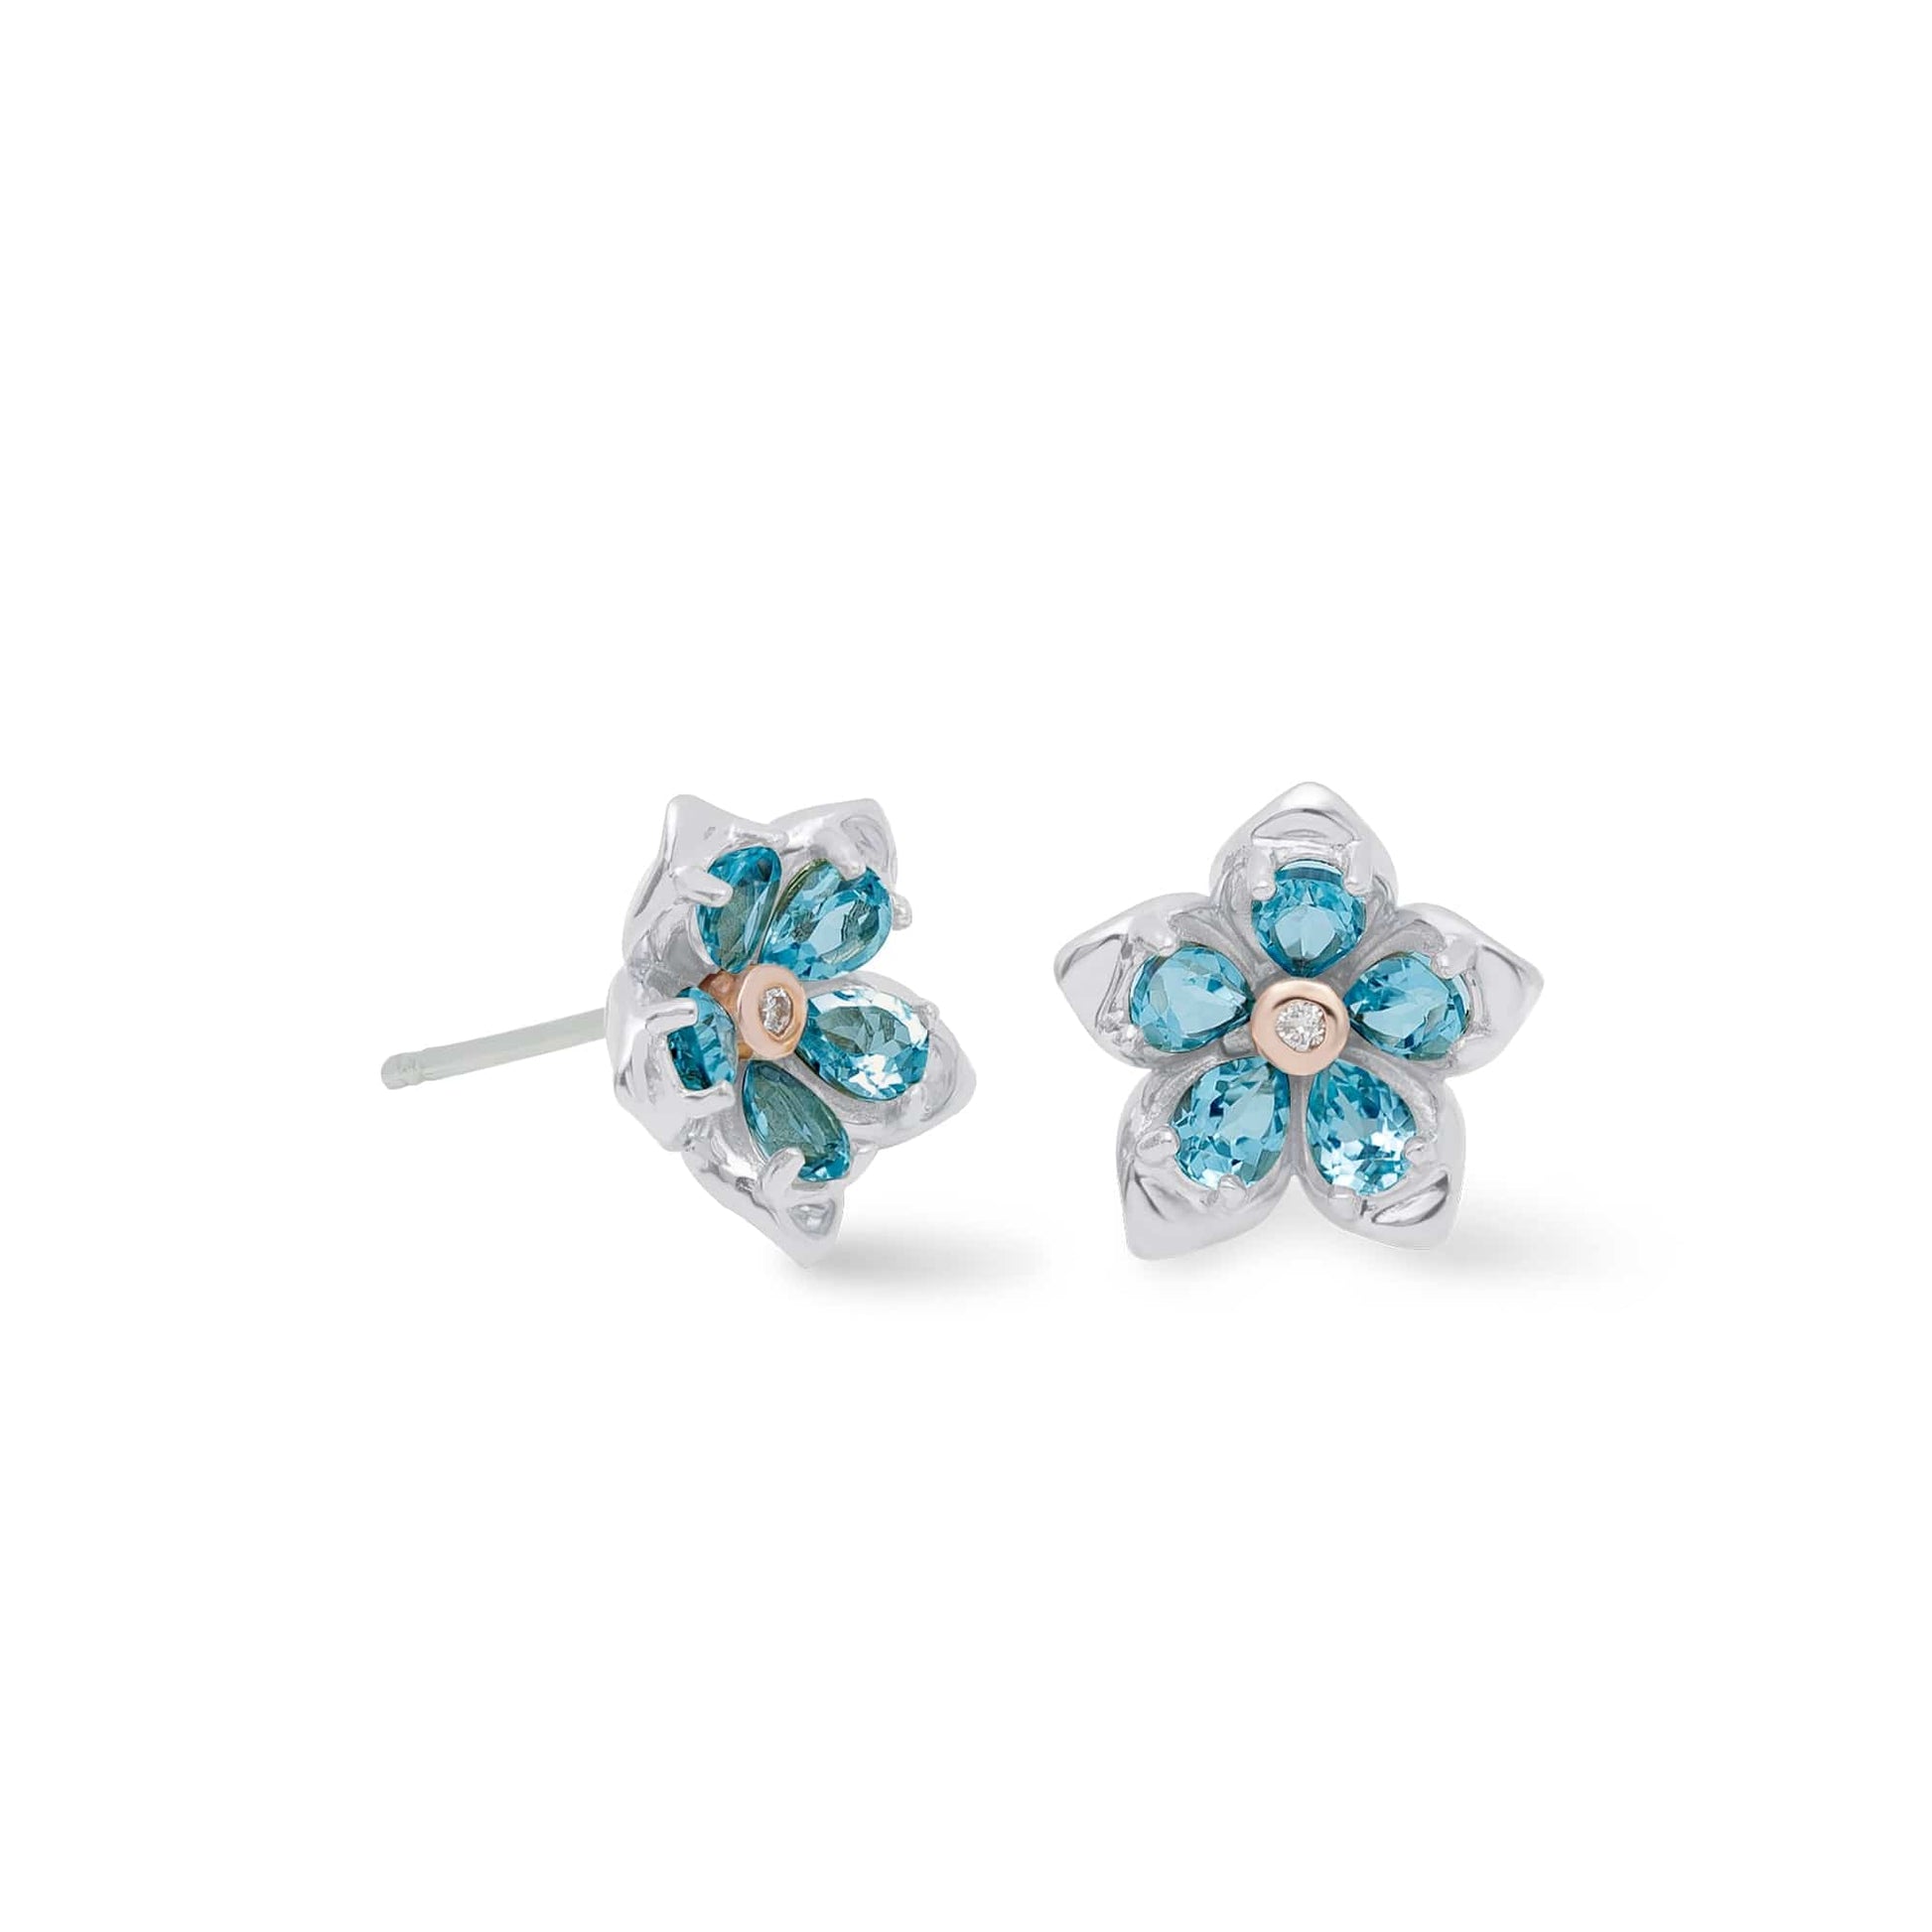 Forget Me Not Silver and London Blue Topaz Stud Earrings